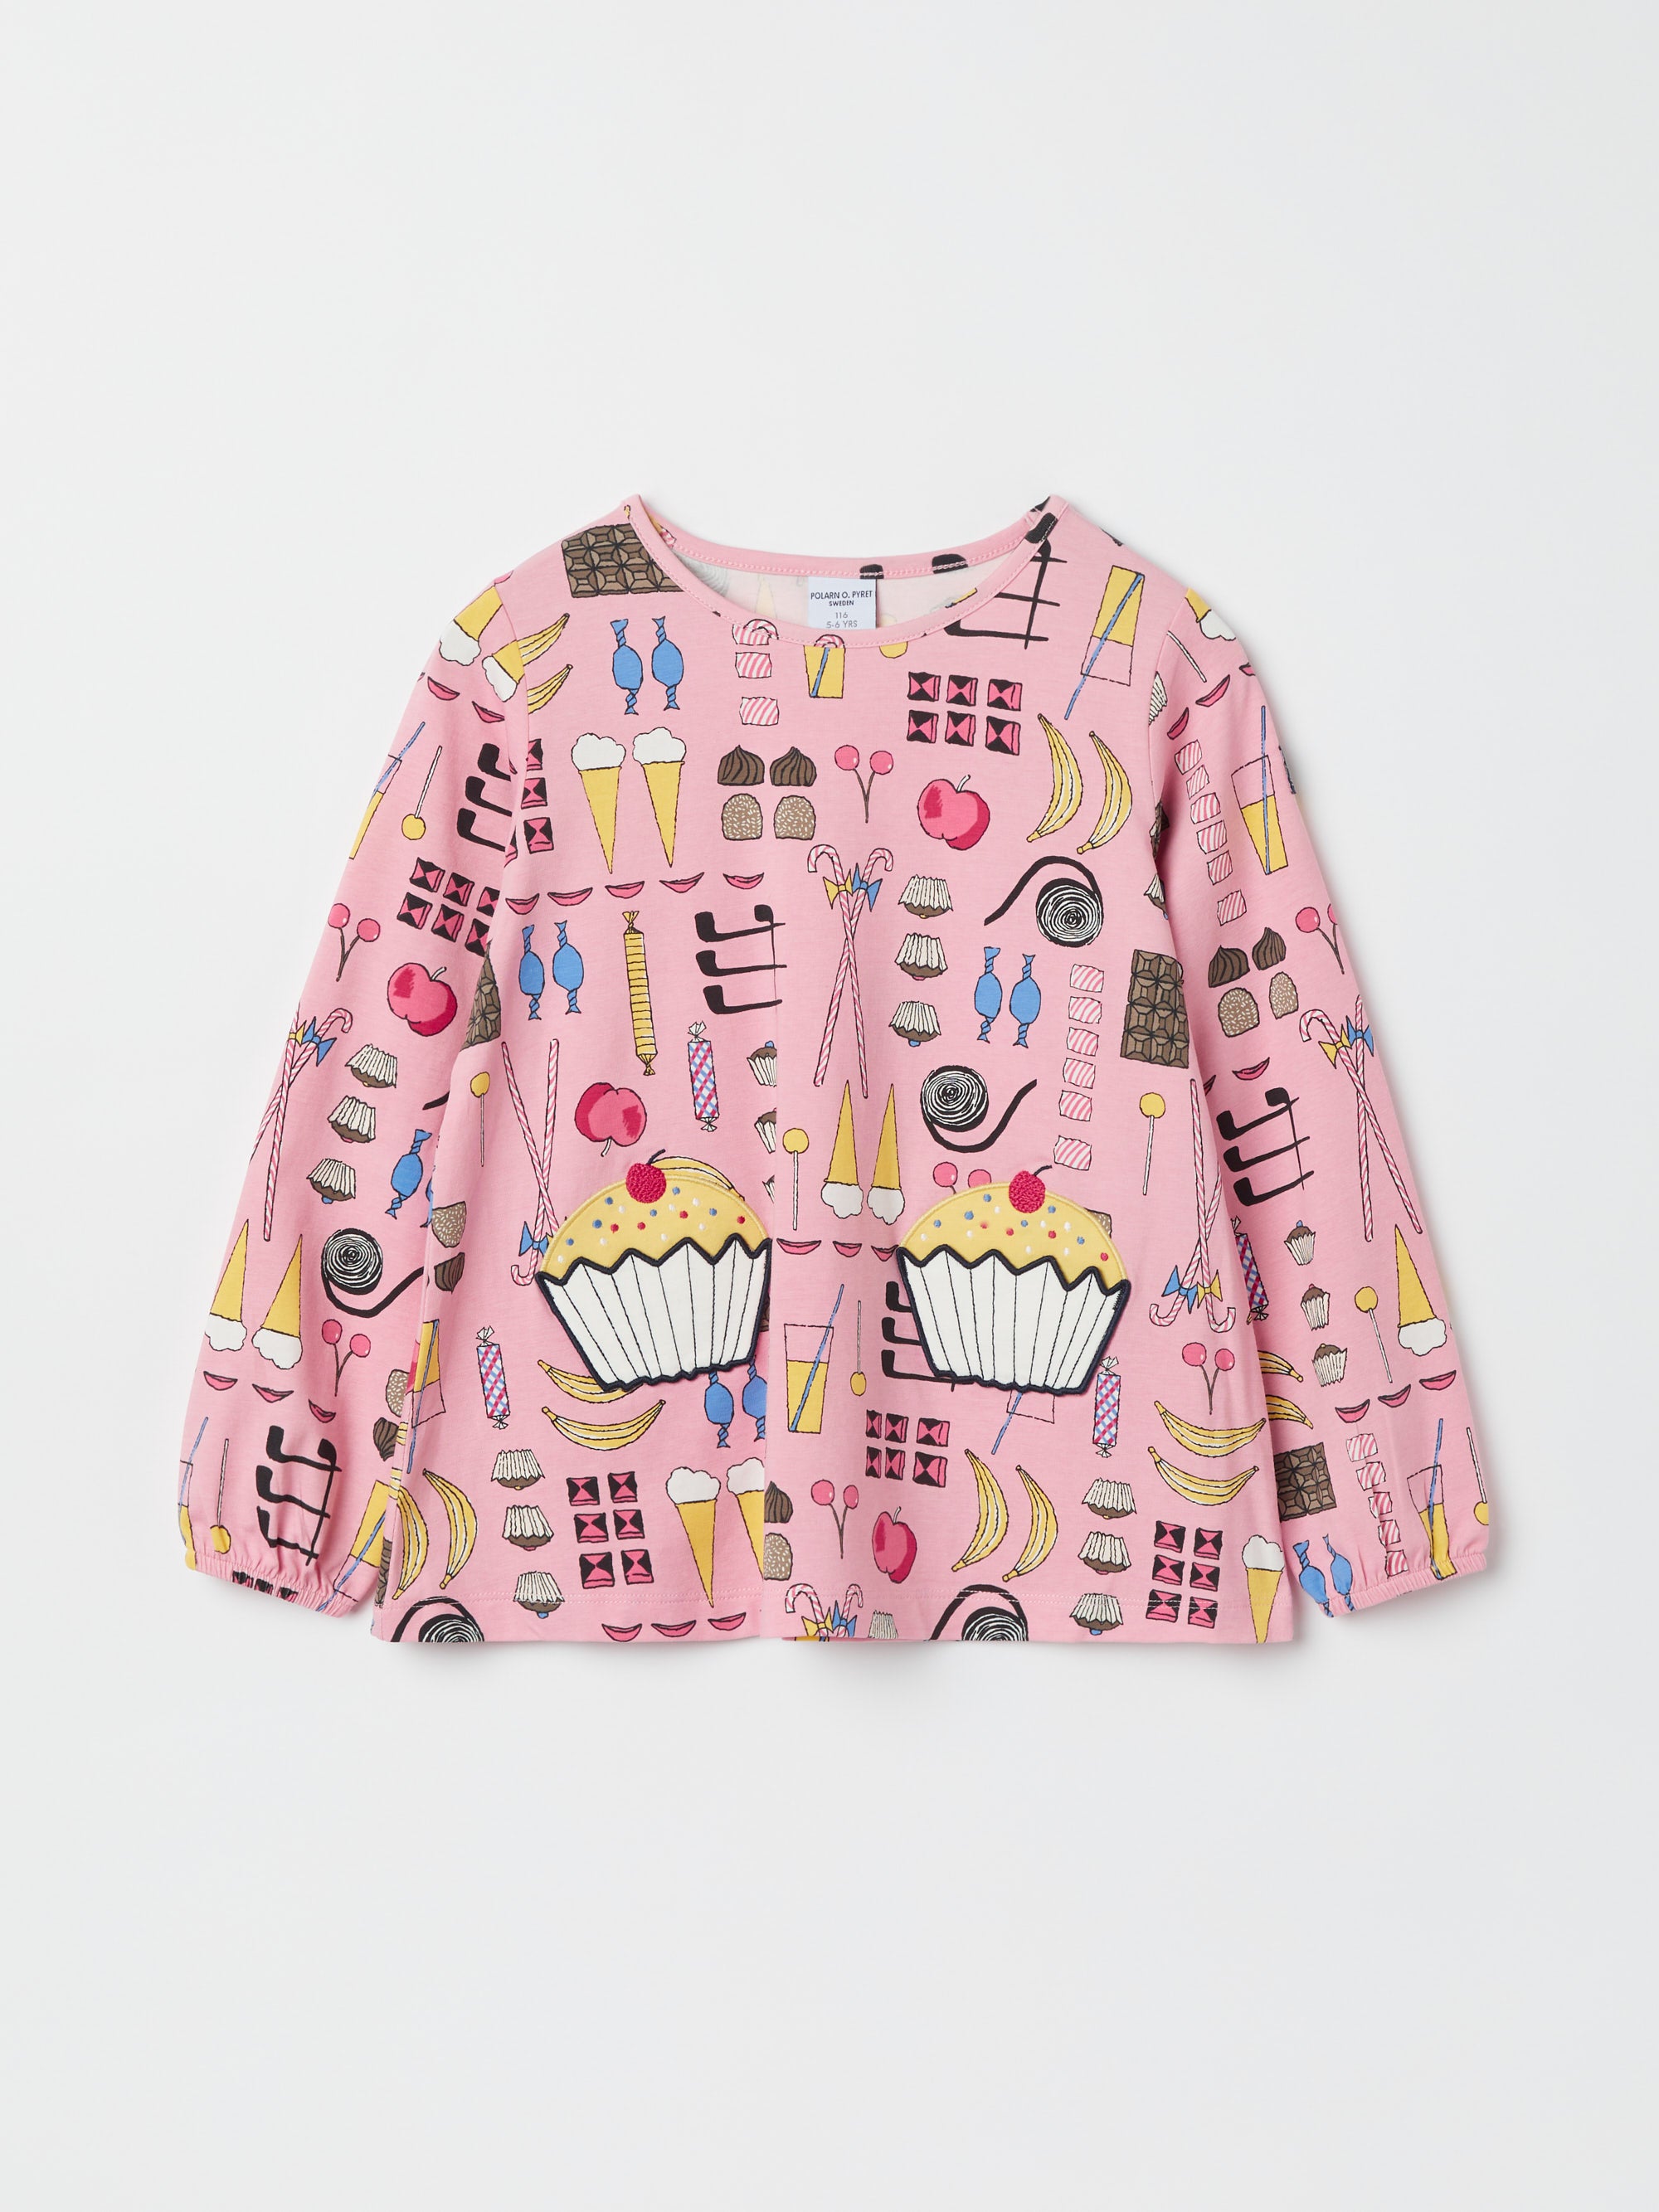 Cup Cake Pockets Kids Top